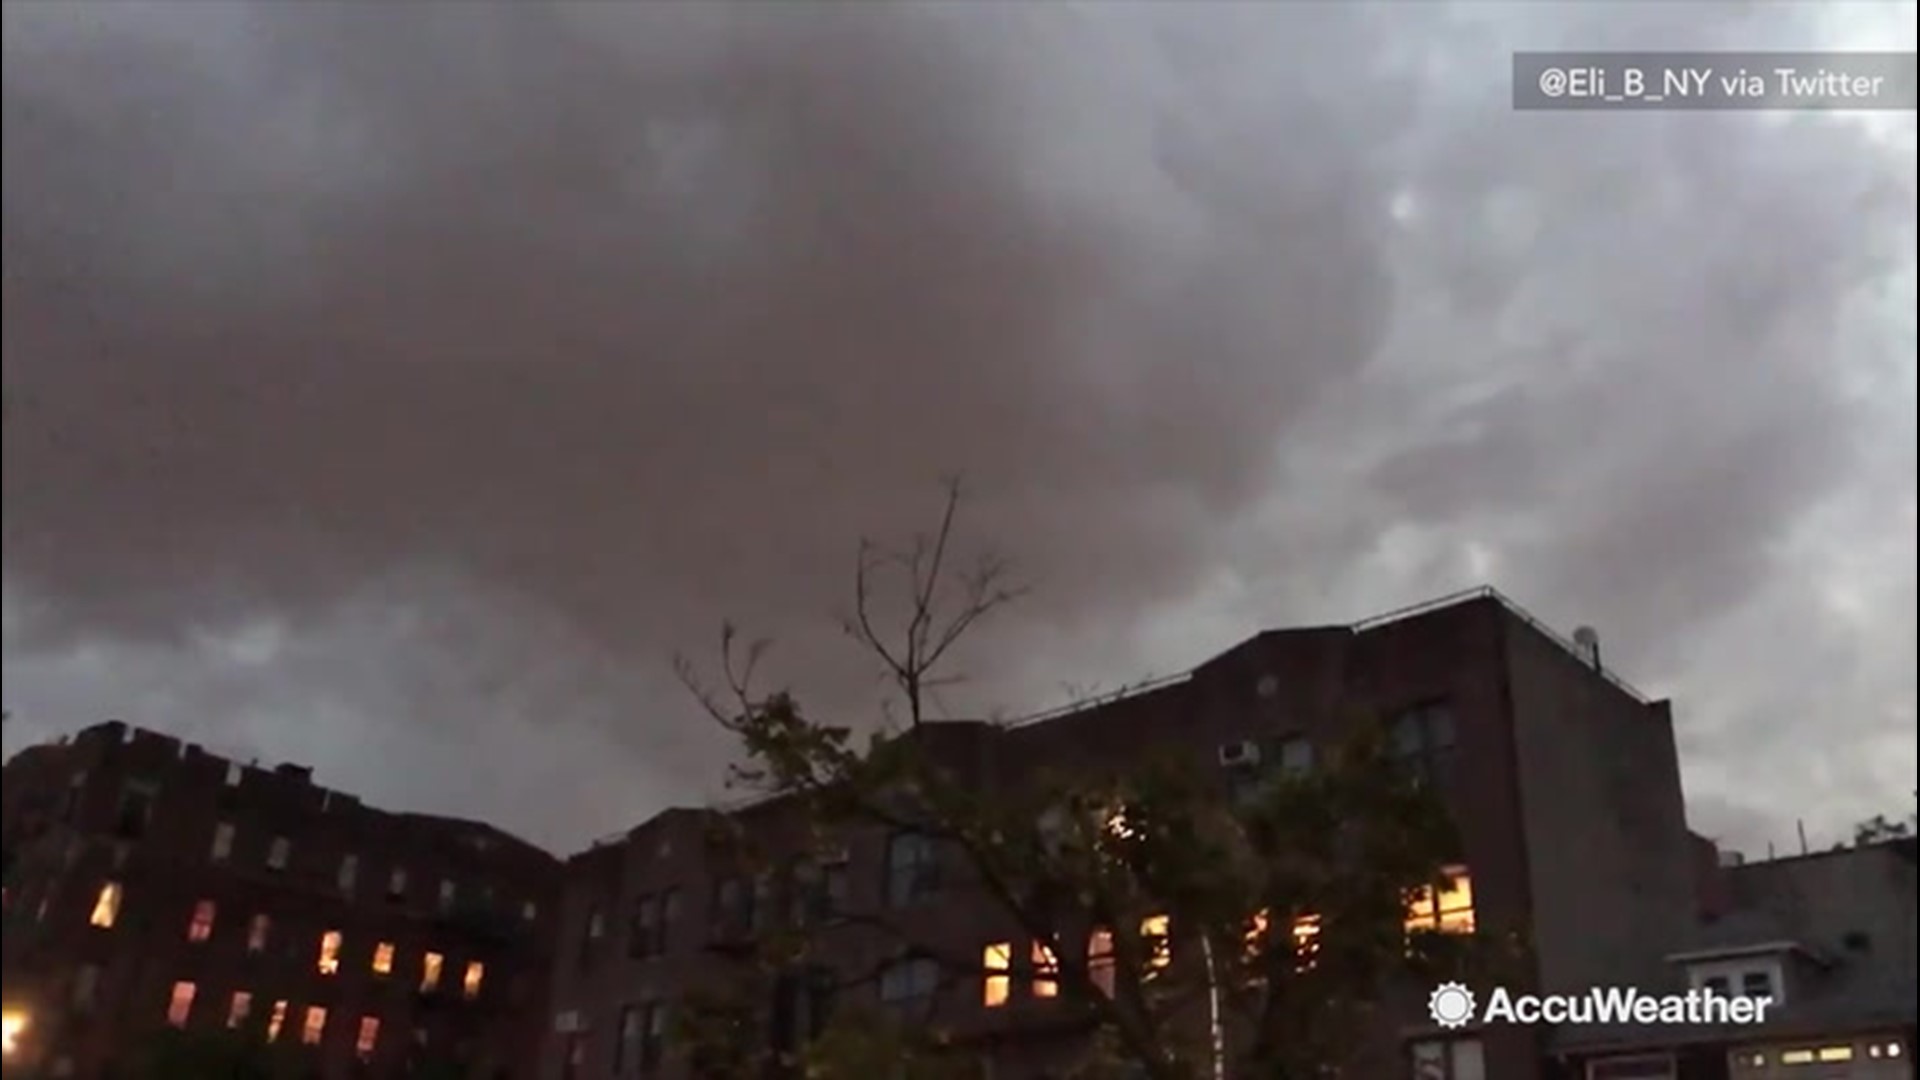 One of our AccuWeather viewers captured some flashes of lightning from his block in Brooklyn, NY, on July 17. He tweeted there was quite the storm brewing and you could see the ominous clouds overhead.